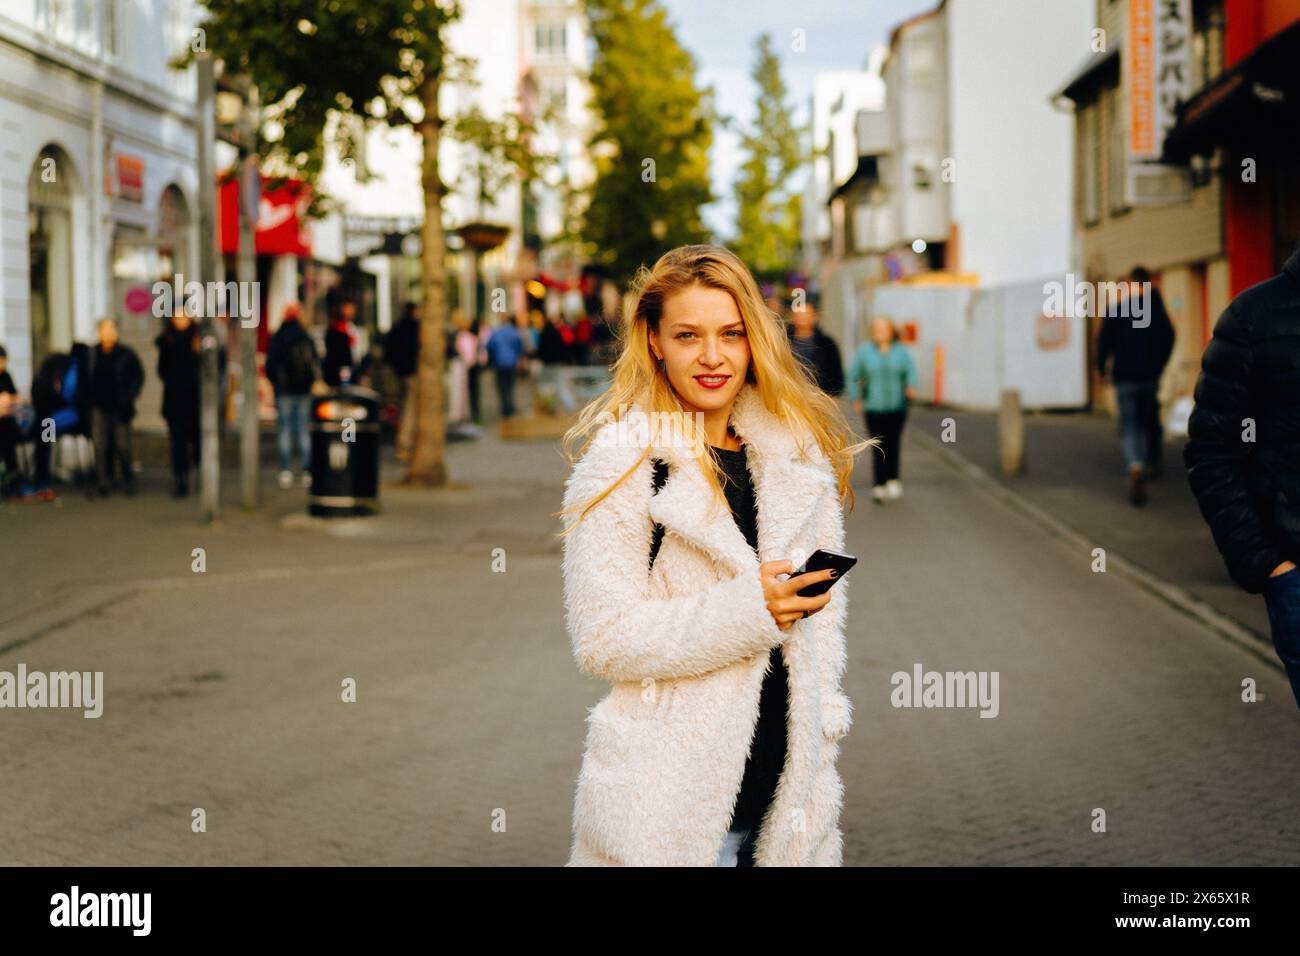 Smiling woman using mobile phone on the street. Stock Photo